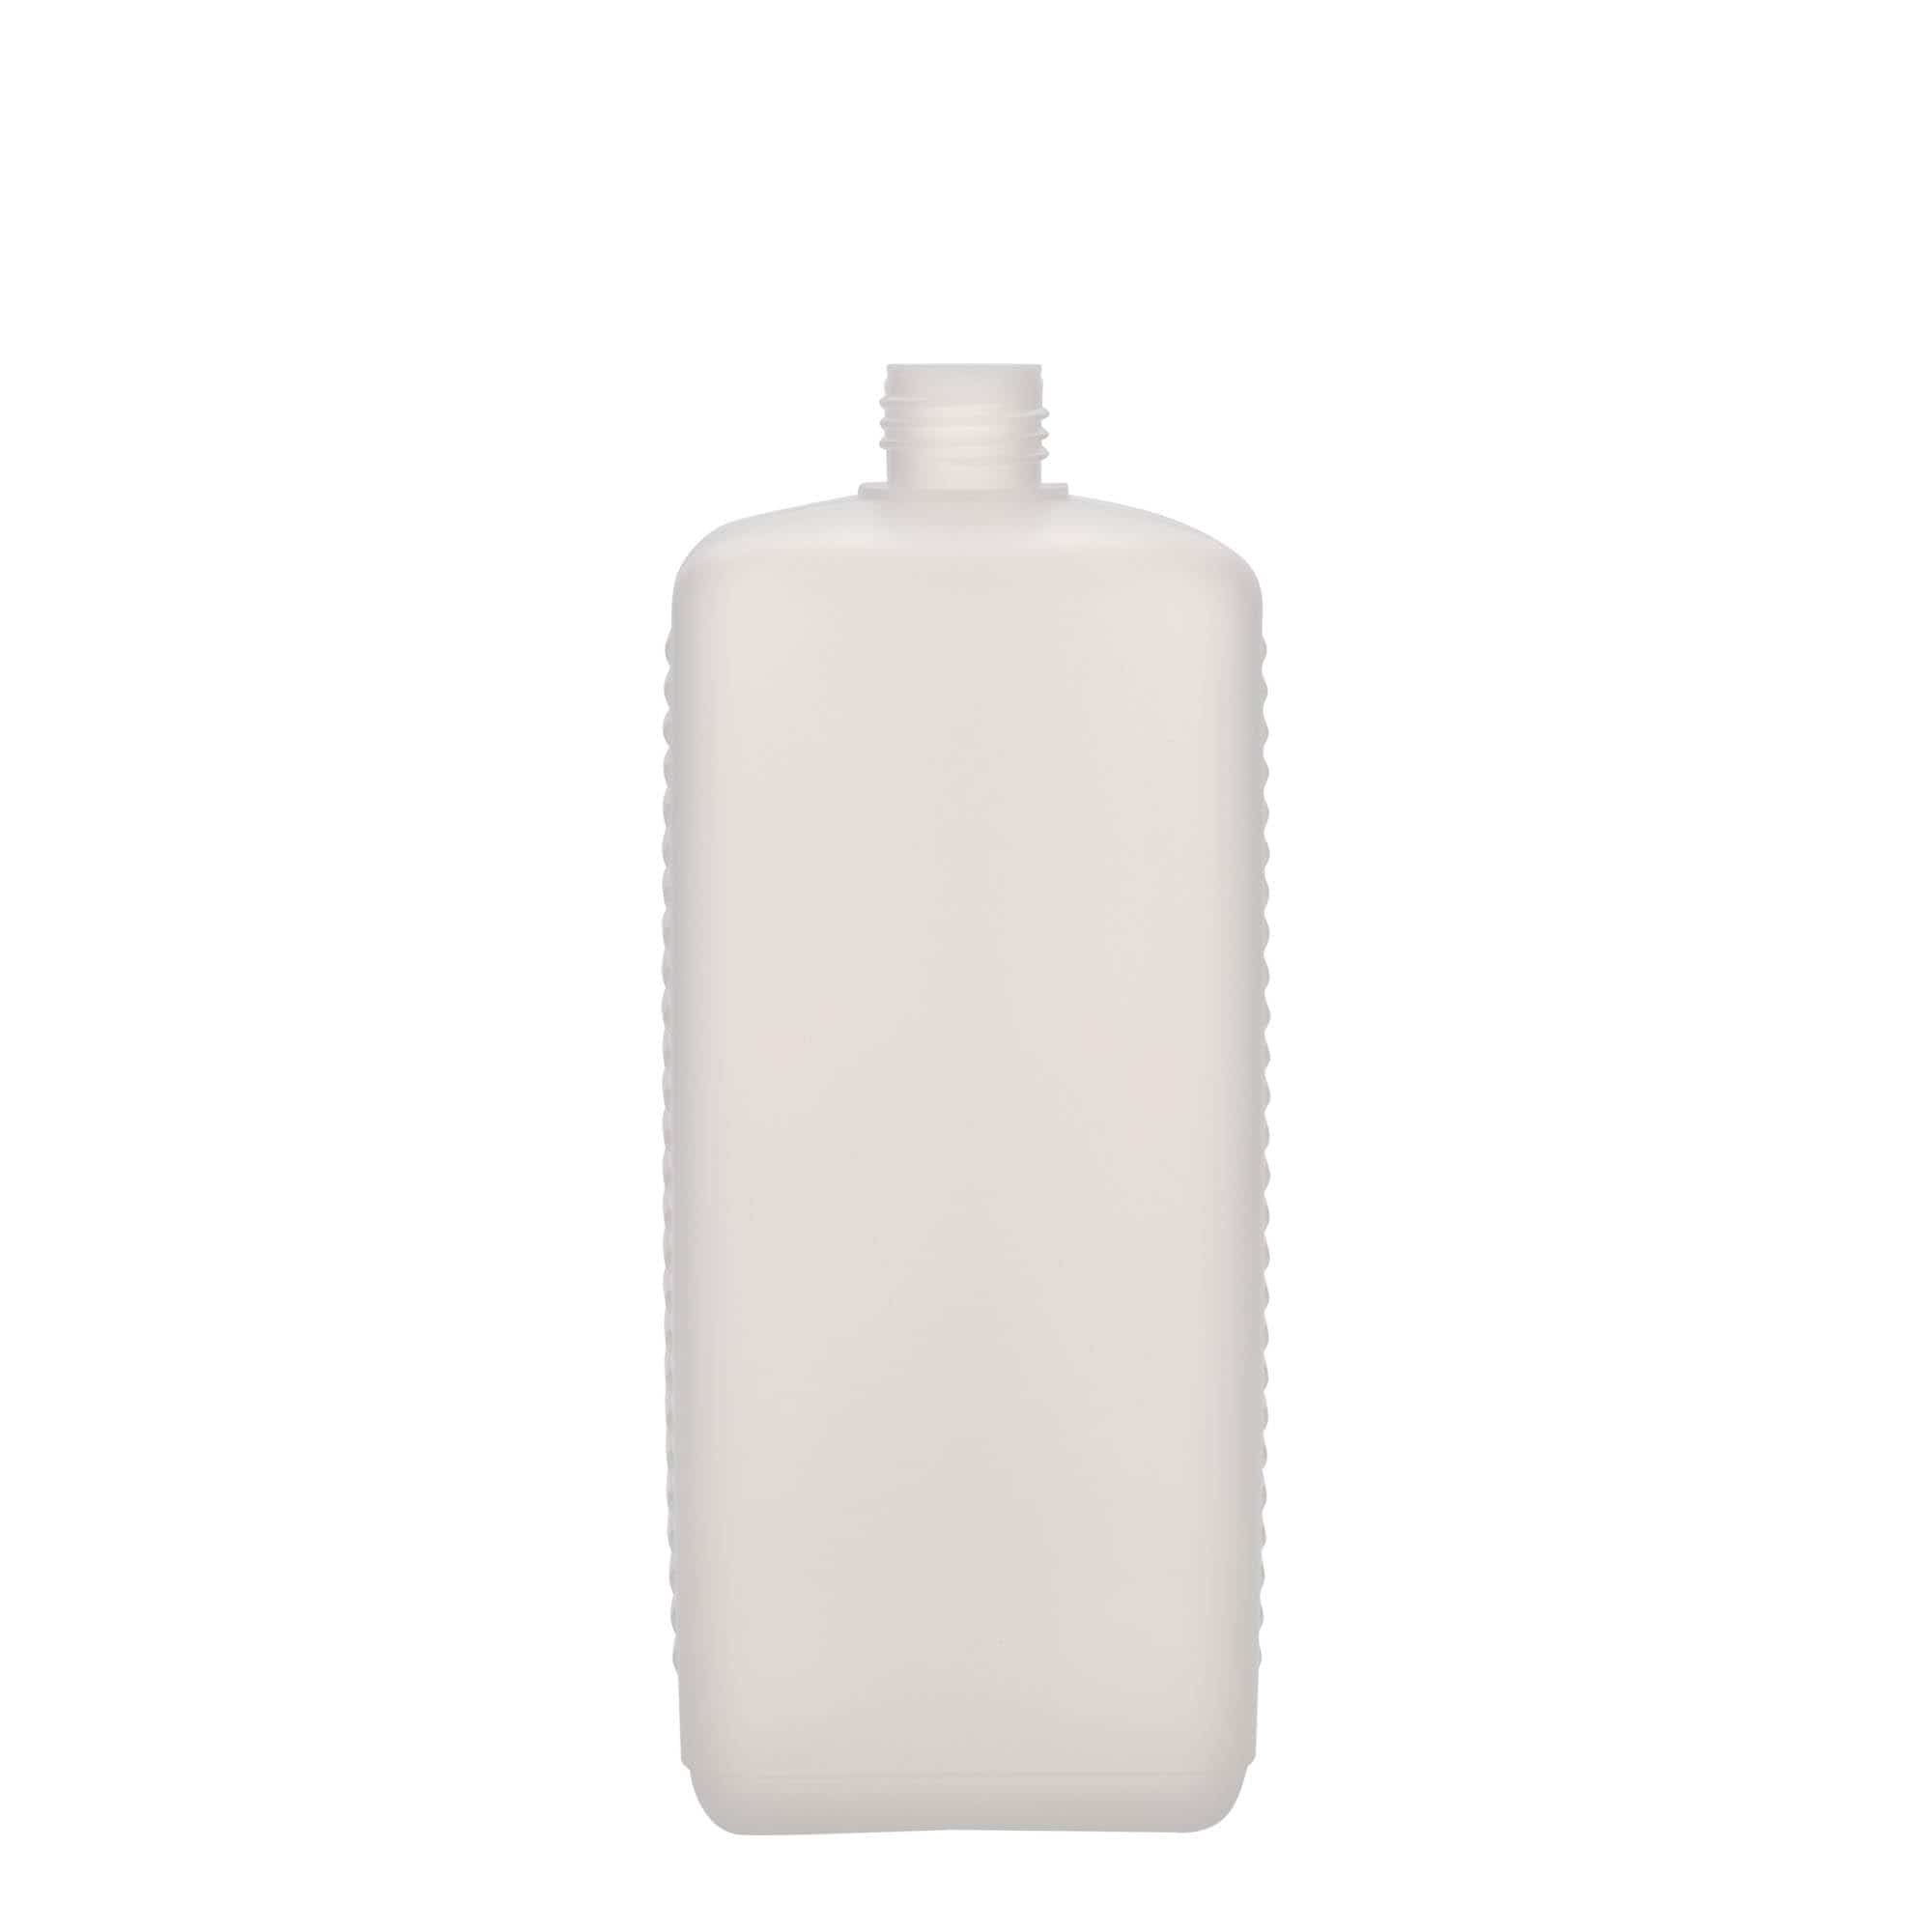 1,000 ml canister bottle, rectangular, HDPE plastic, natural, closure: DIN 25 EPE